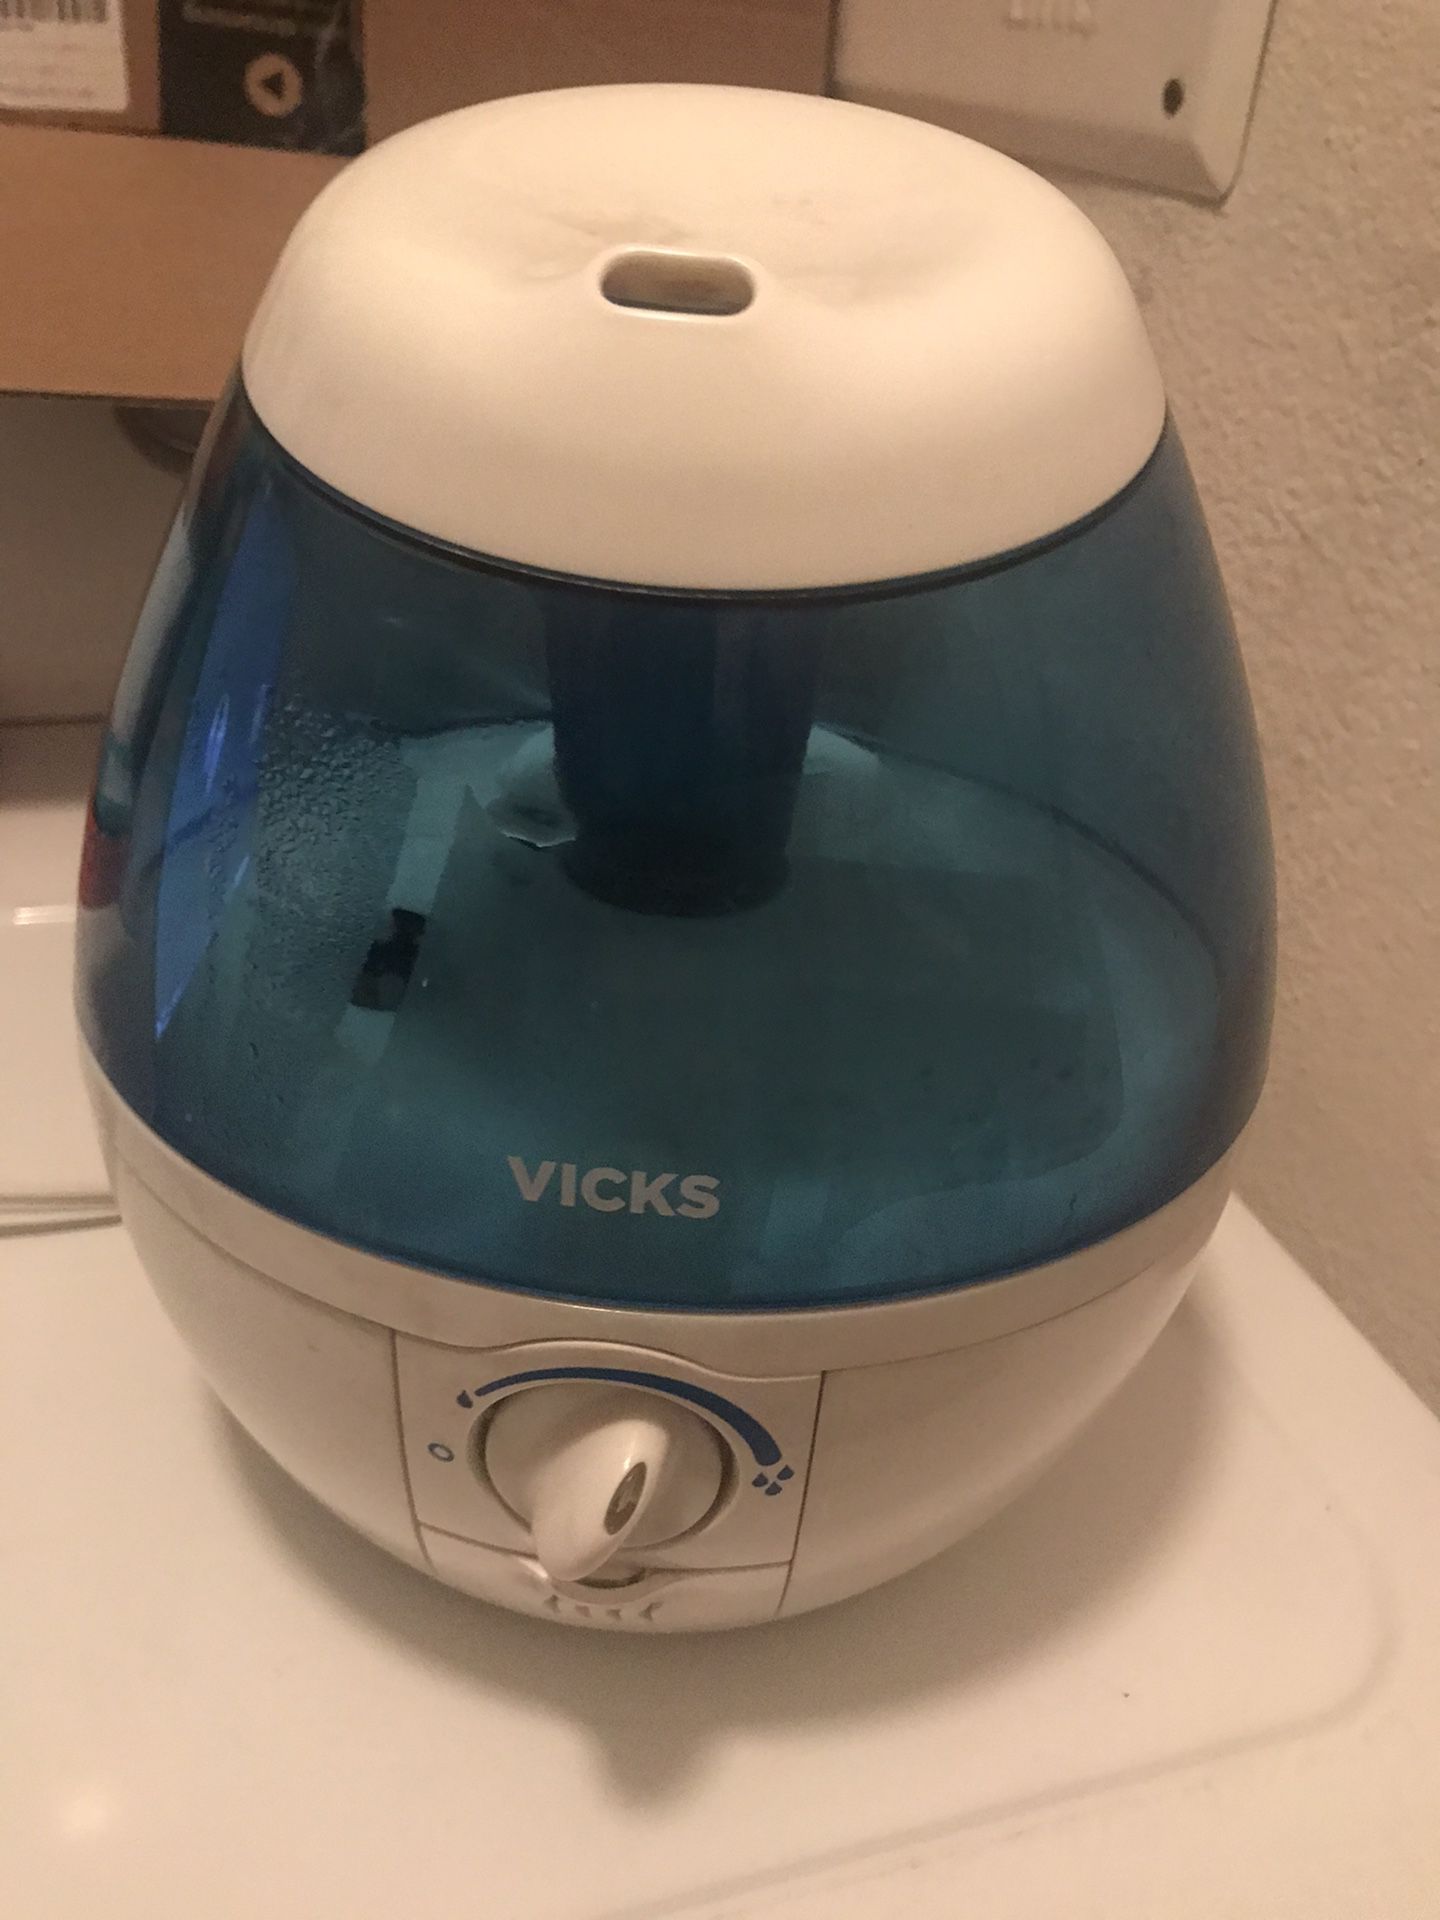 Vicks Mini Filter Free Cool Mist Humidifier Small Humidifier for Bedrooms, Baby, Kids Rooms, Auto-Shut Off, 0.5 Gallon Tank for 20 Hours of Moisturiz